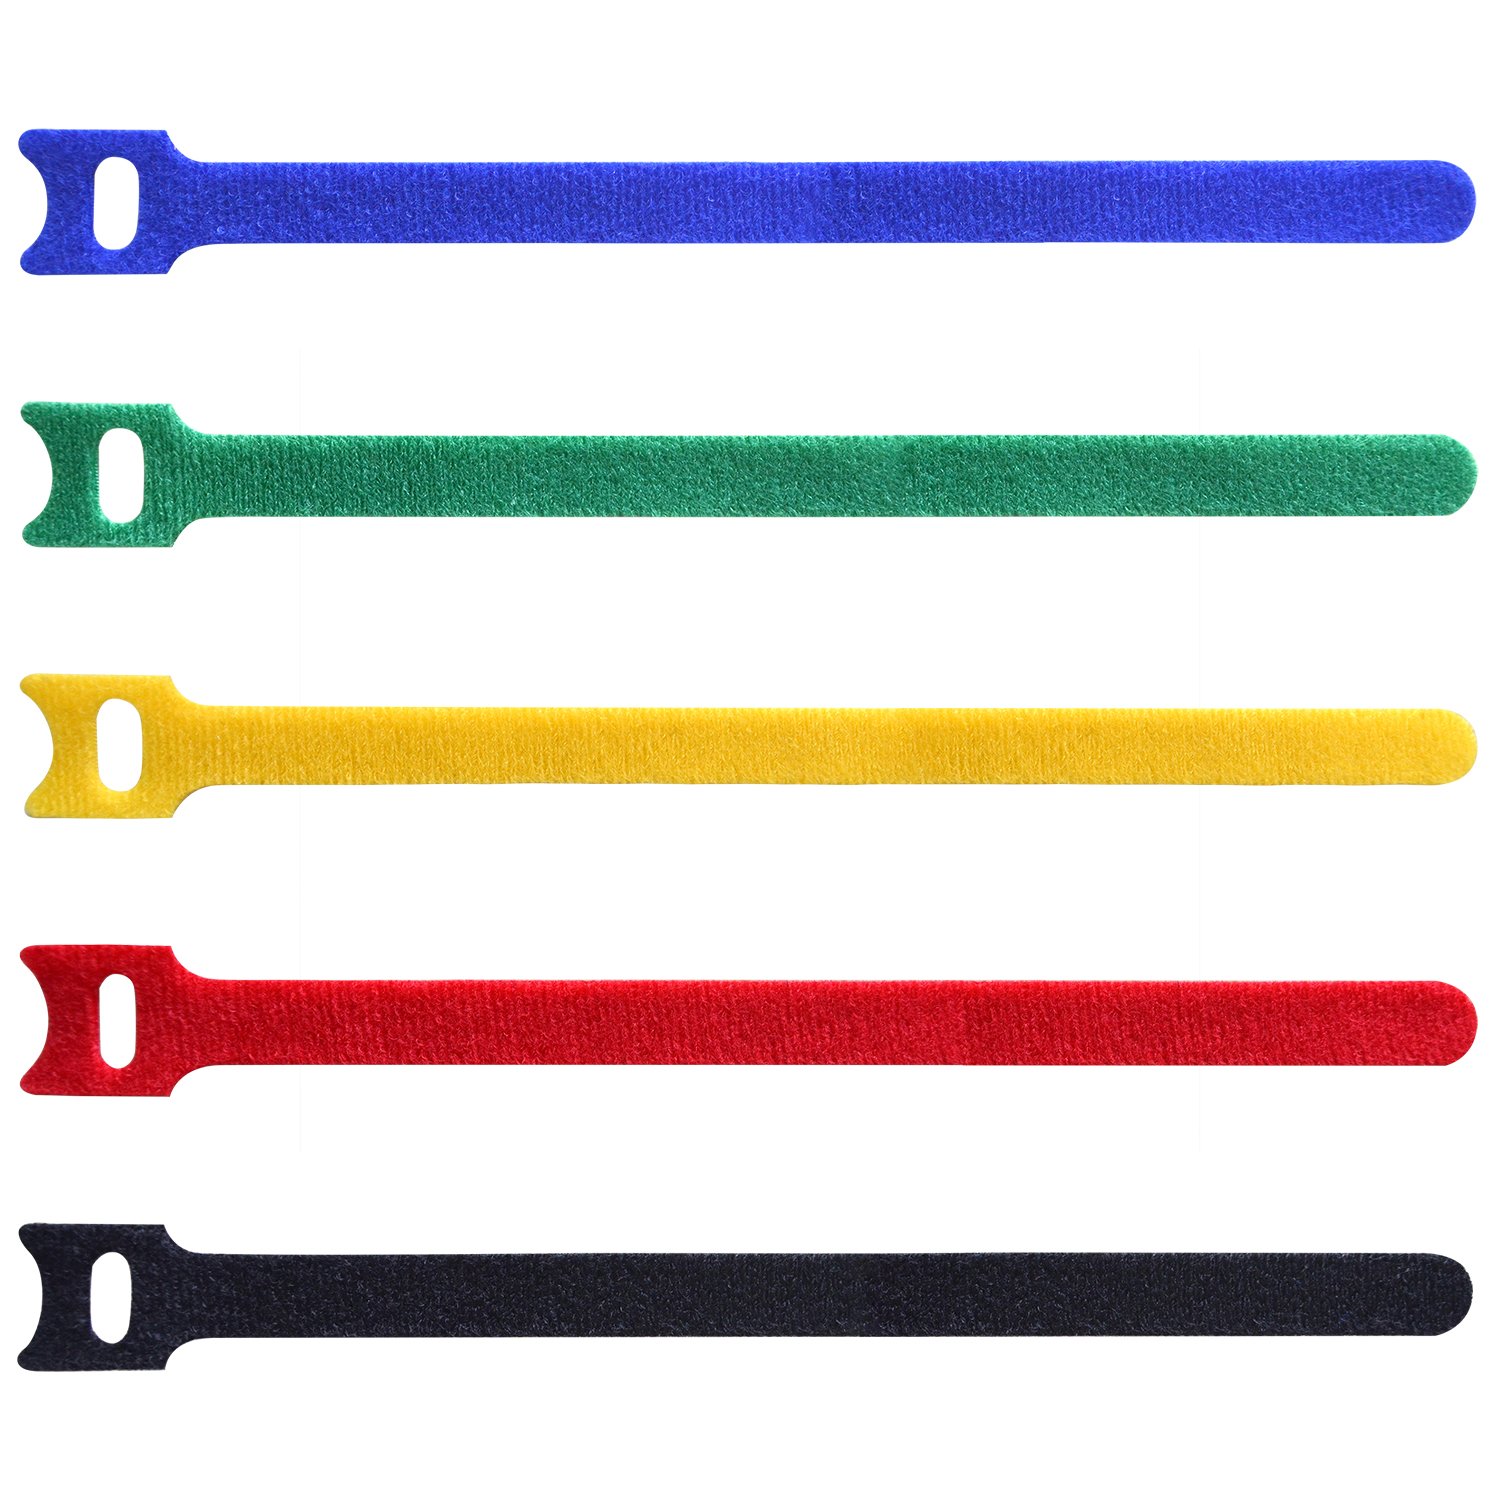 GWHOLE Reusable Cable Ties 34cm/ 42cm/ 52cm 3 Sizes Pack of 20 Hook and Loop Straps Nylon Cable Ties Organizer Fastener